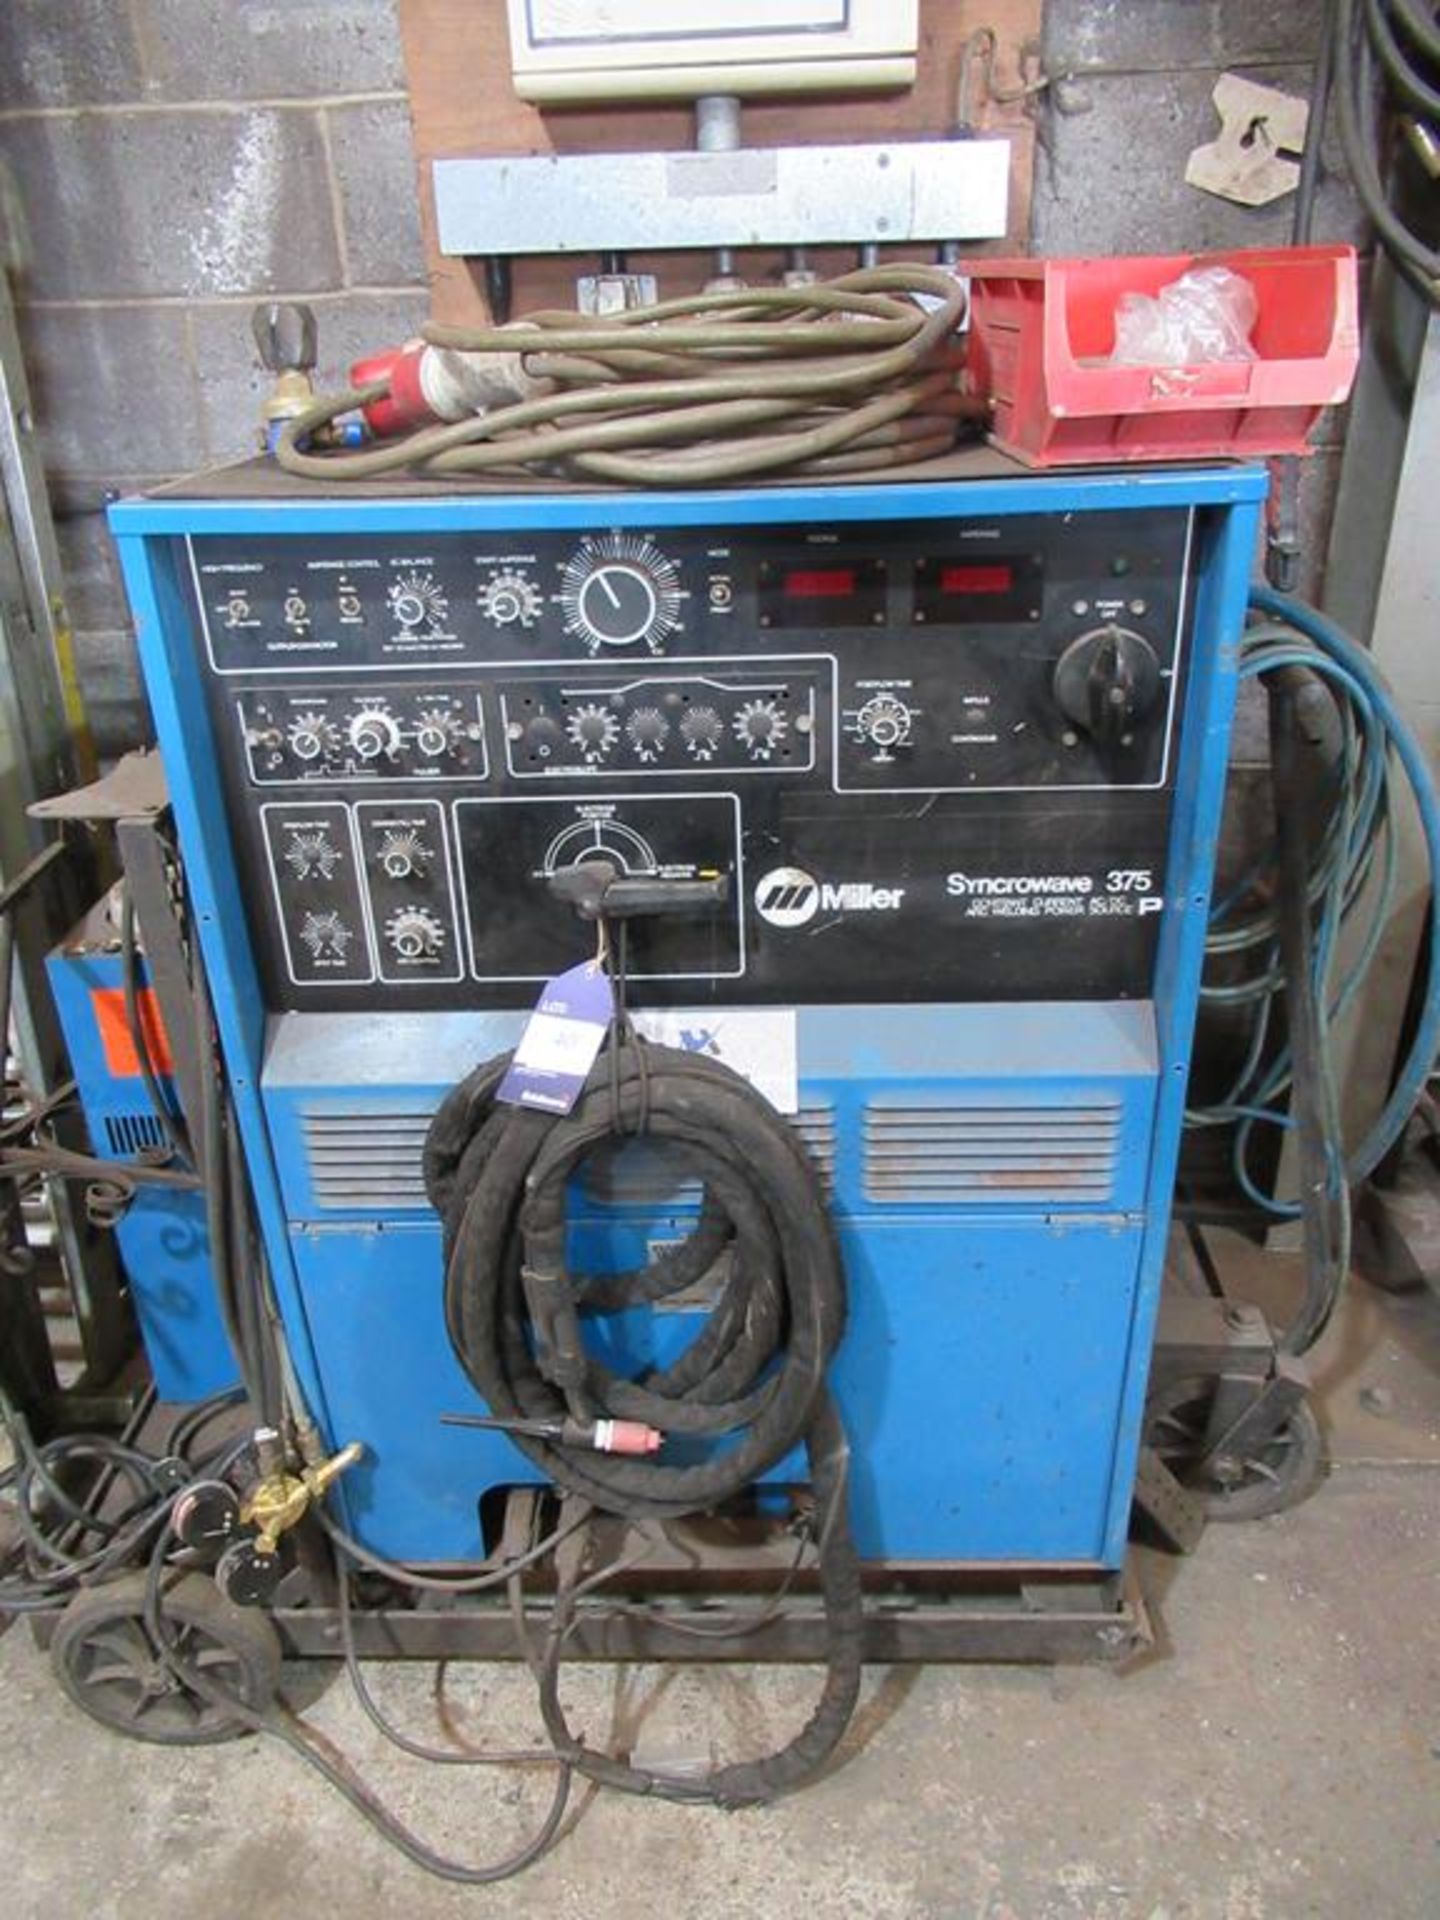 A Miller Syncrowave 375 constant current ARC welding power source AC/DC source